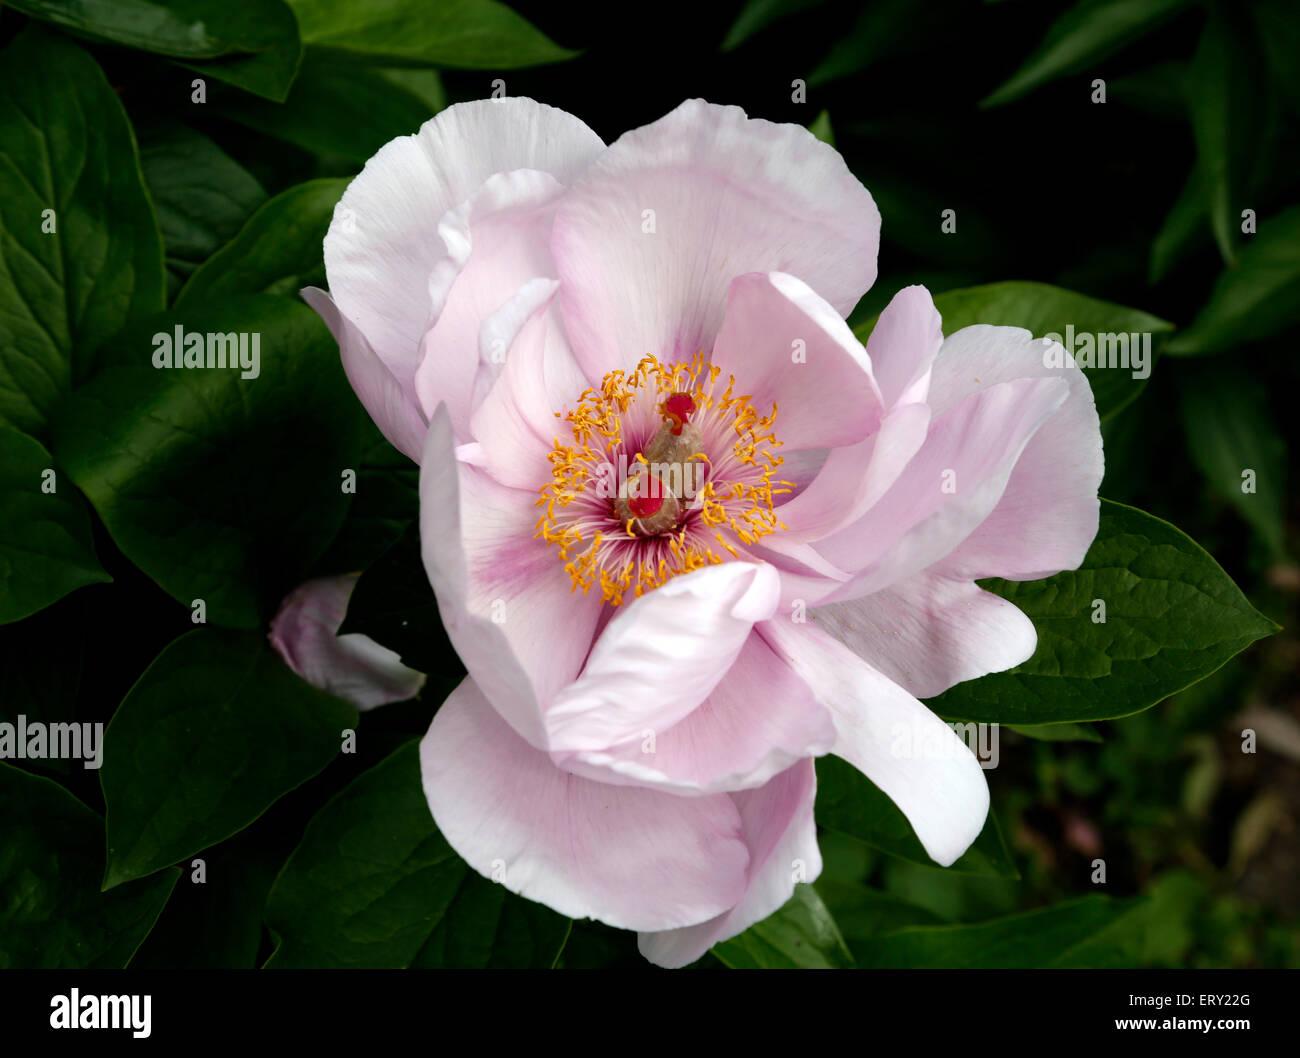 The Pink Peony is pink with orange stamens and a red bud in the center. Stock Photo